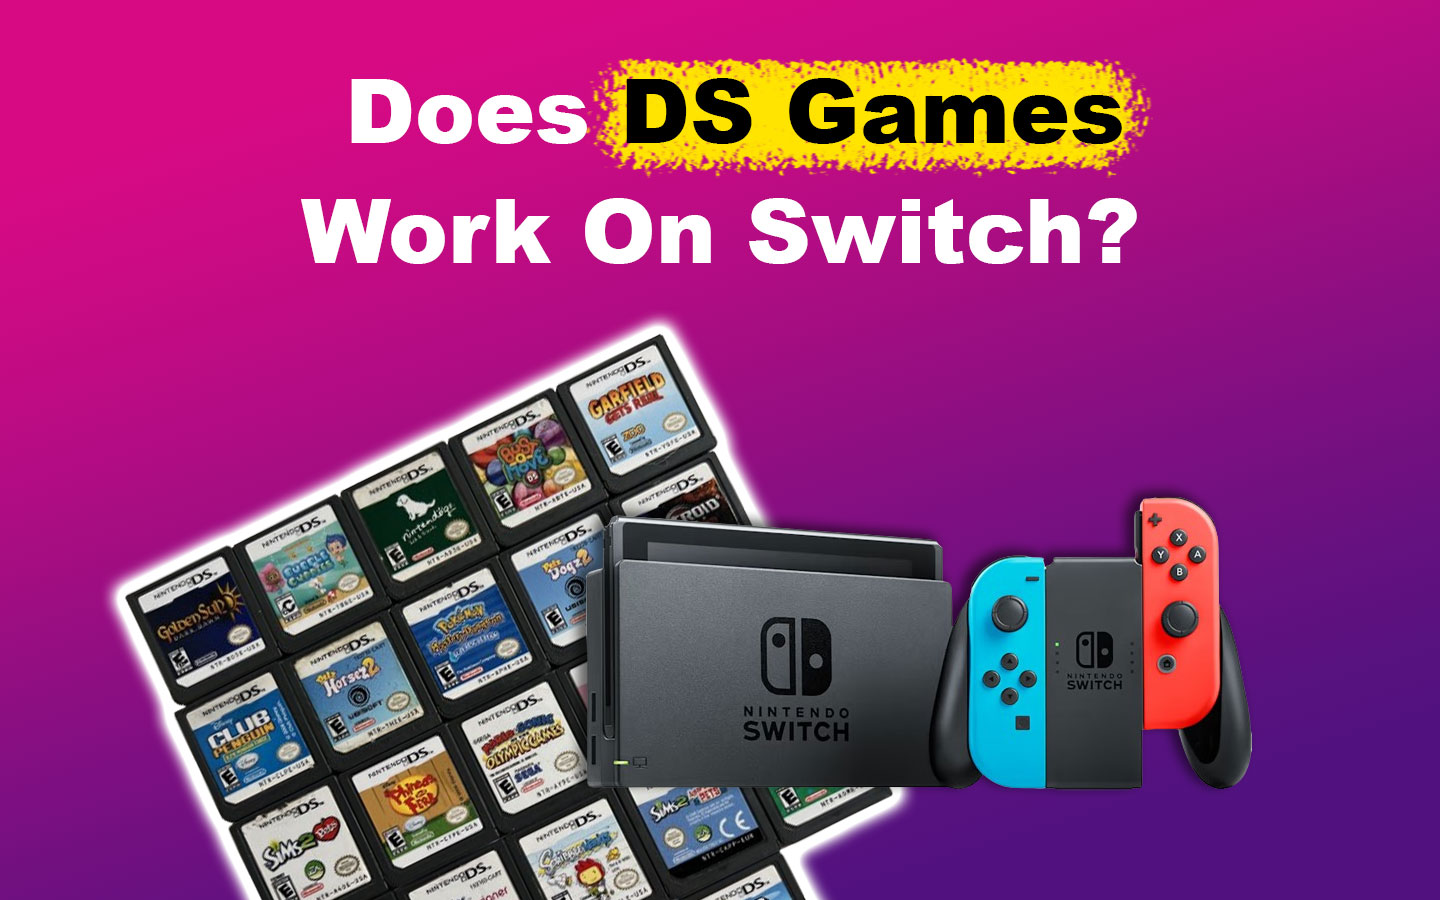 Do DS Games Work on Switch?